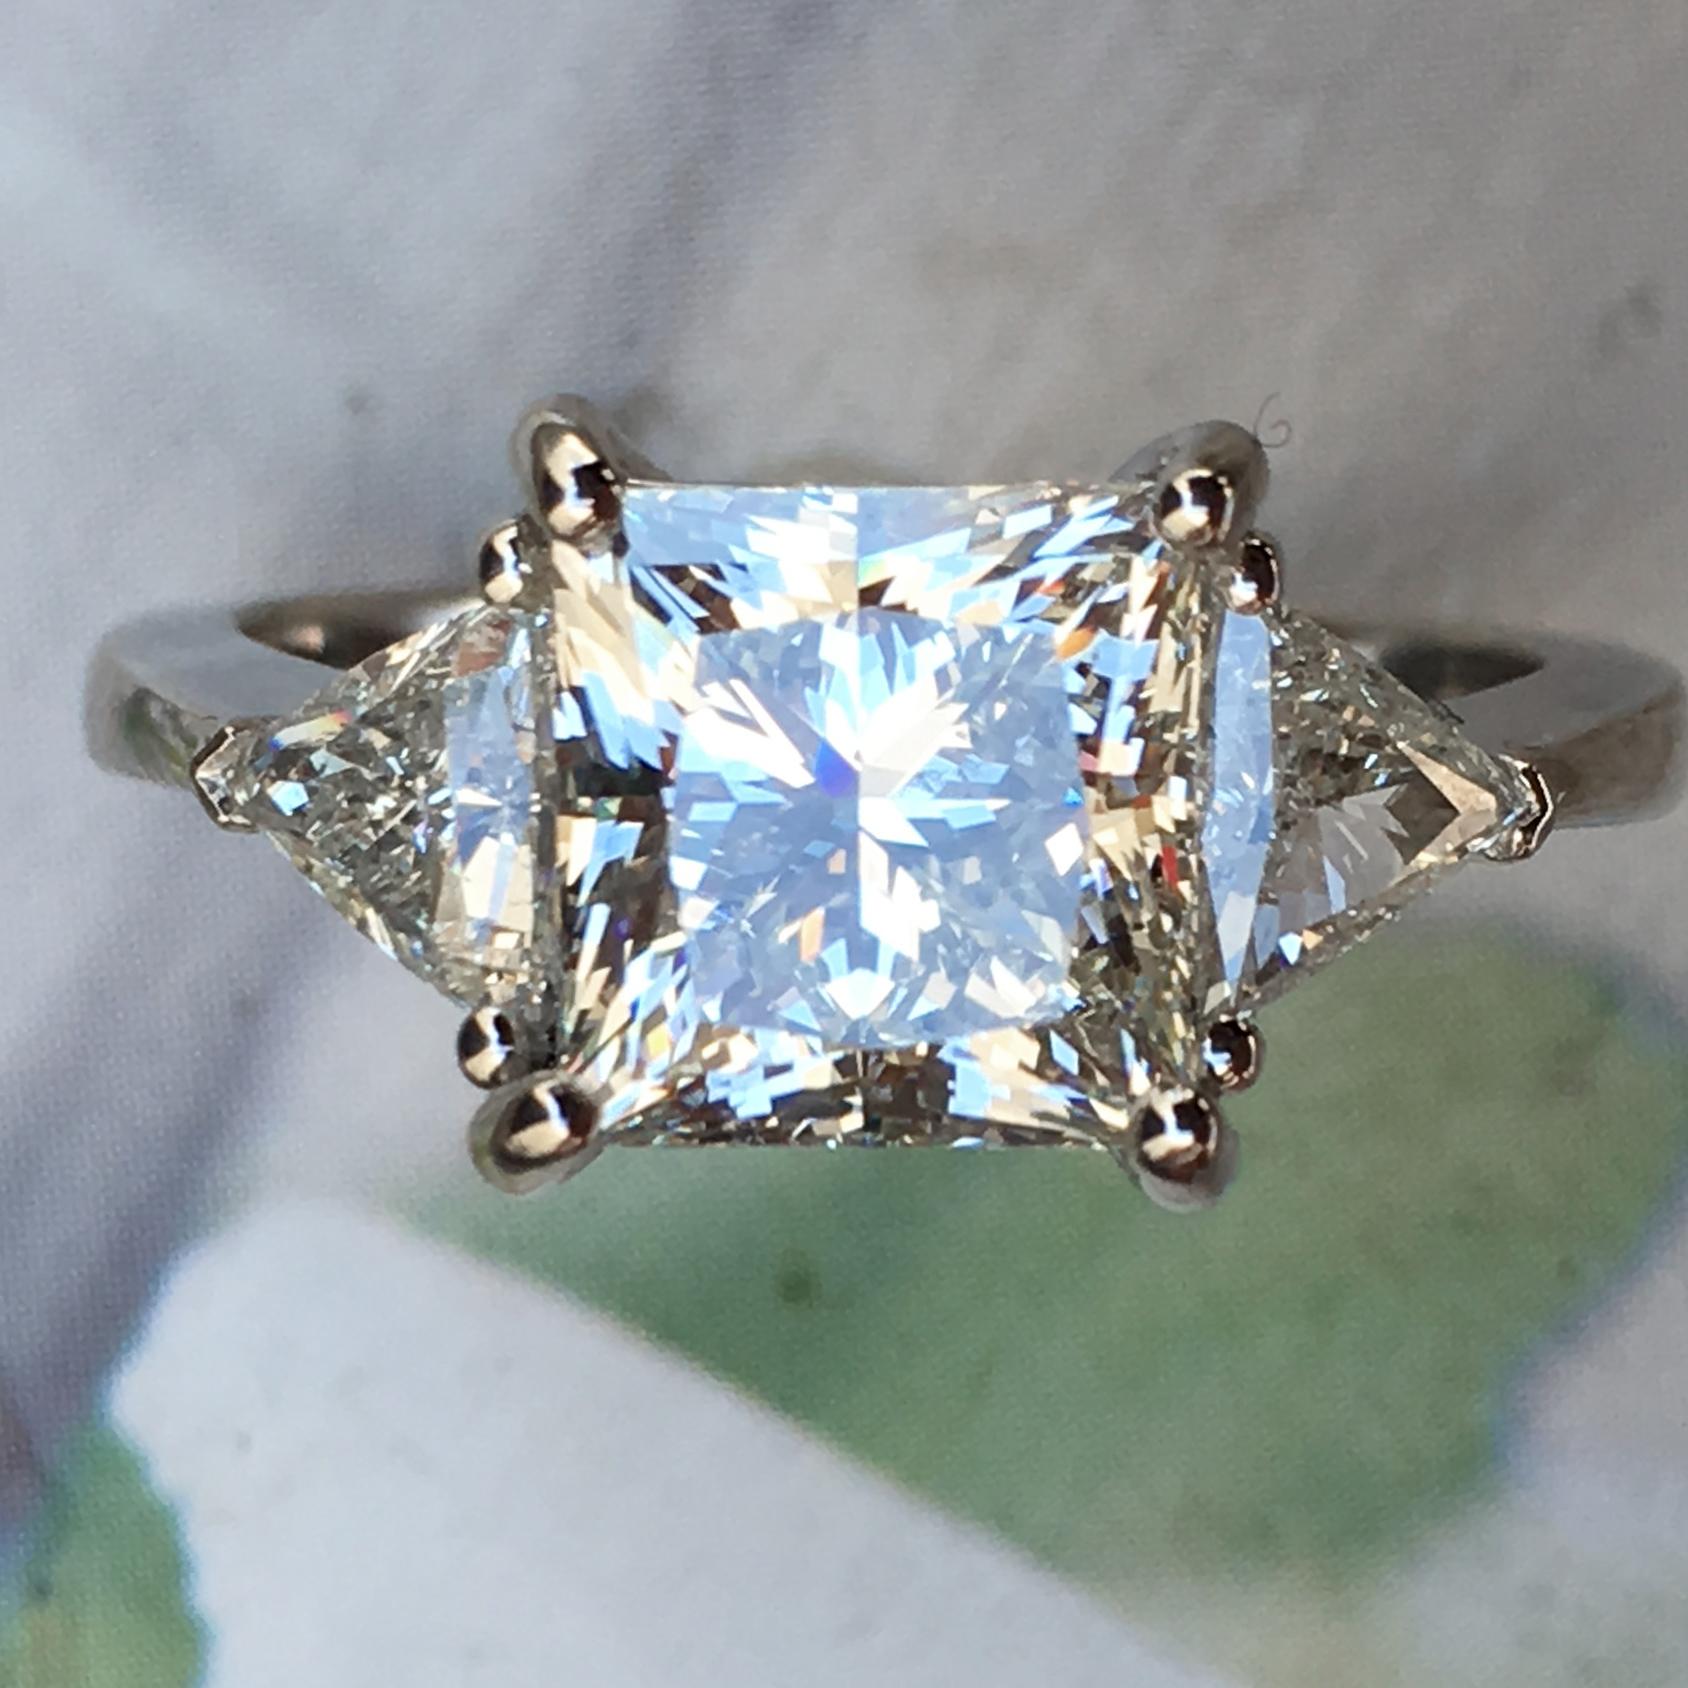 Can be sized to any finger size, ring will be made to order and take approximately 10-20 business days.

Price shown is for diamond with the ring in your size, if you want to use your own diamond or a different one to change the price please message